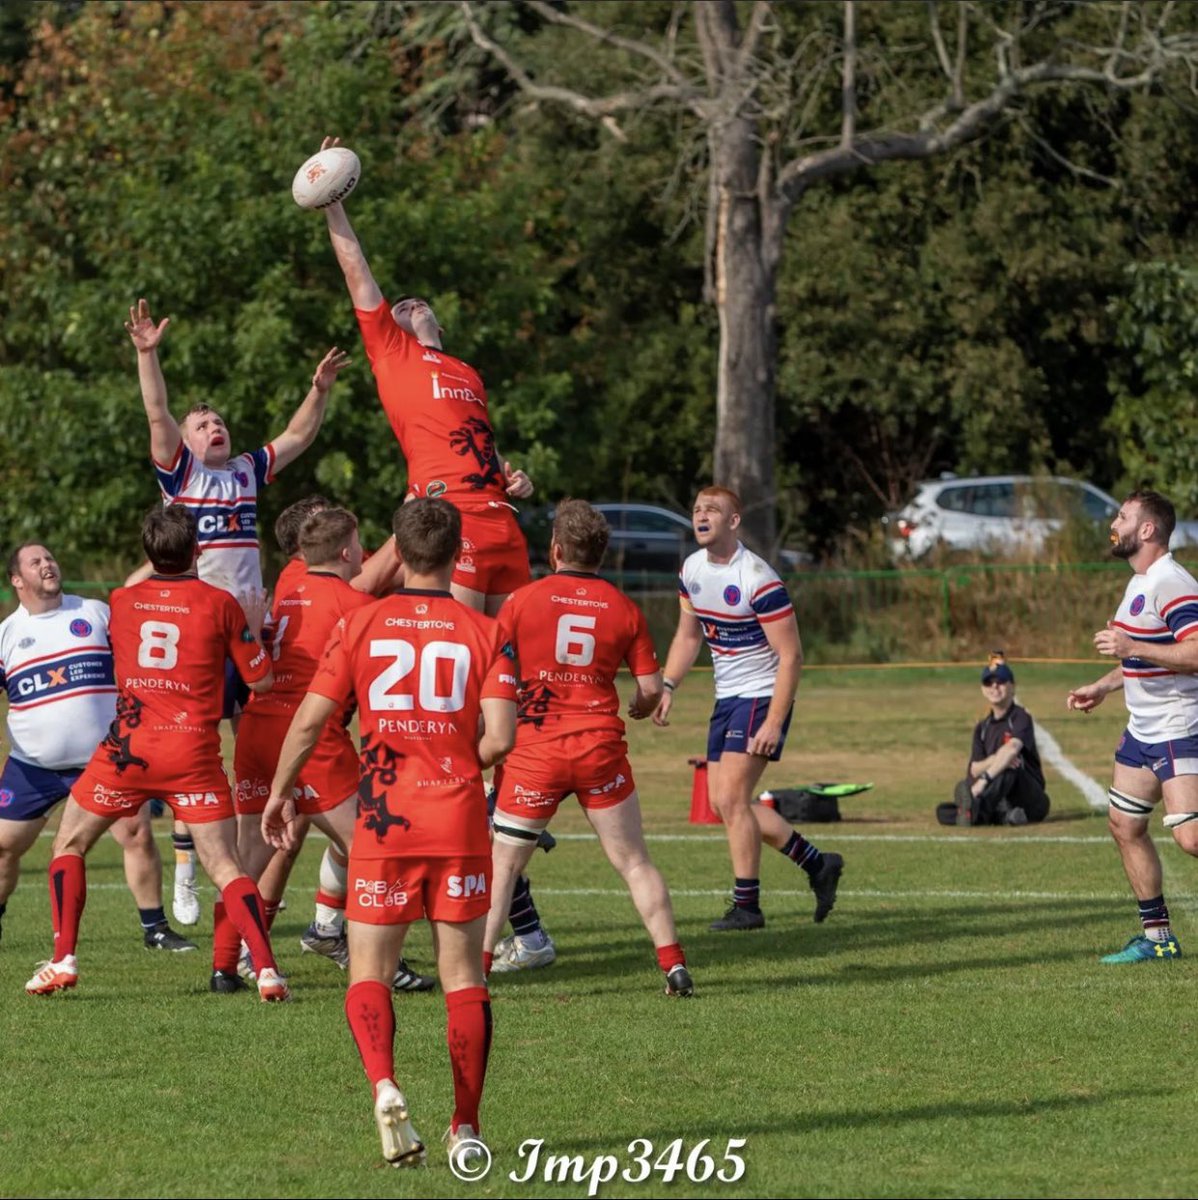 Congrats to @LondonWelshRFC team for a cracking home #victory last week! 🏆🧨 Looking forward to see you all at Round 4 against Maidenhead🏉 Team innDex will be there cheering you on 👯‍♂️🏴󠁧󠁢󠁷󠁬󠁳󠁿 Keep up the good work and keep making us proud boys 💪🏼 #lwfamily